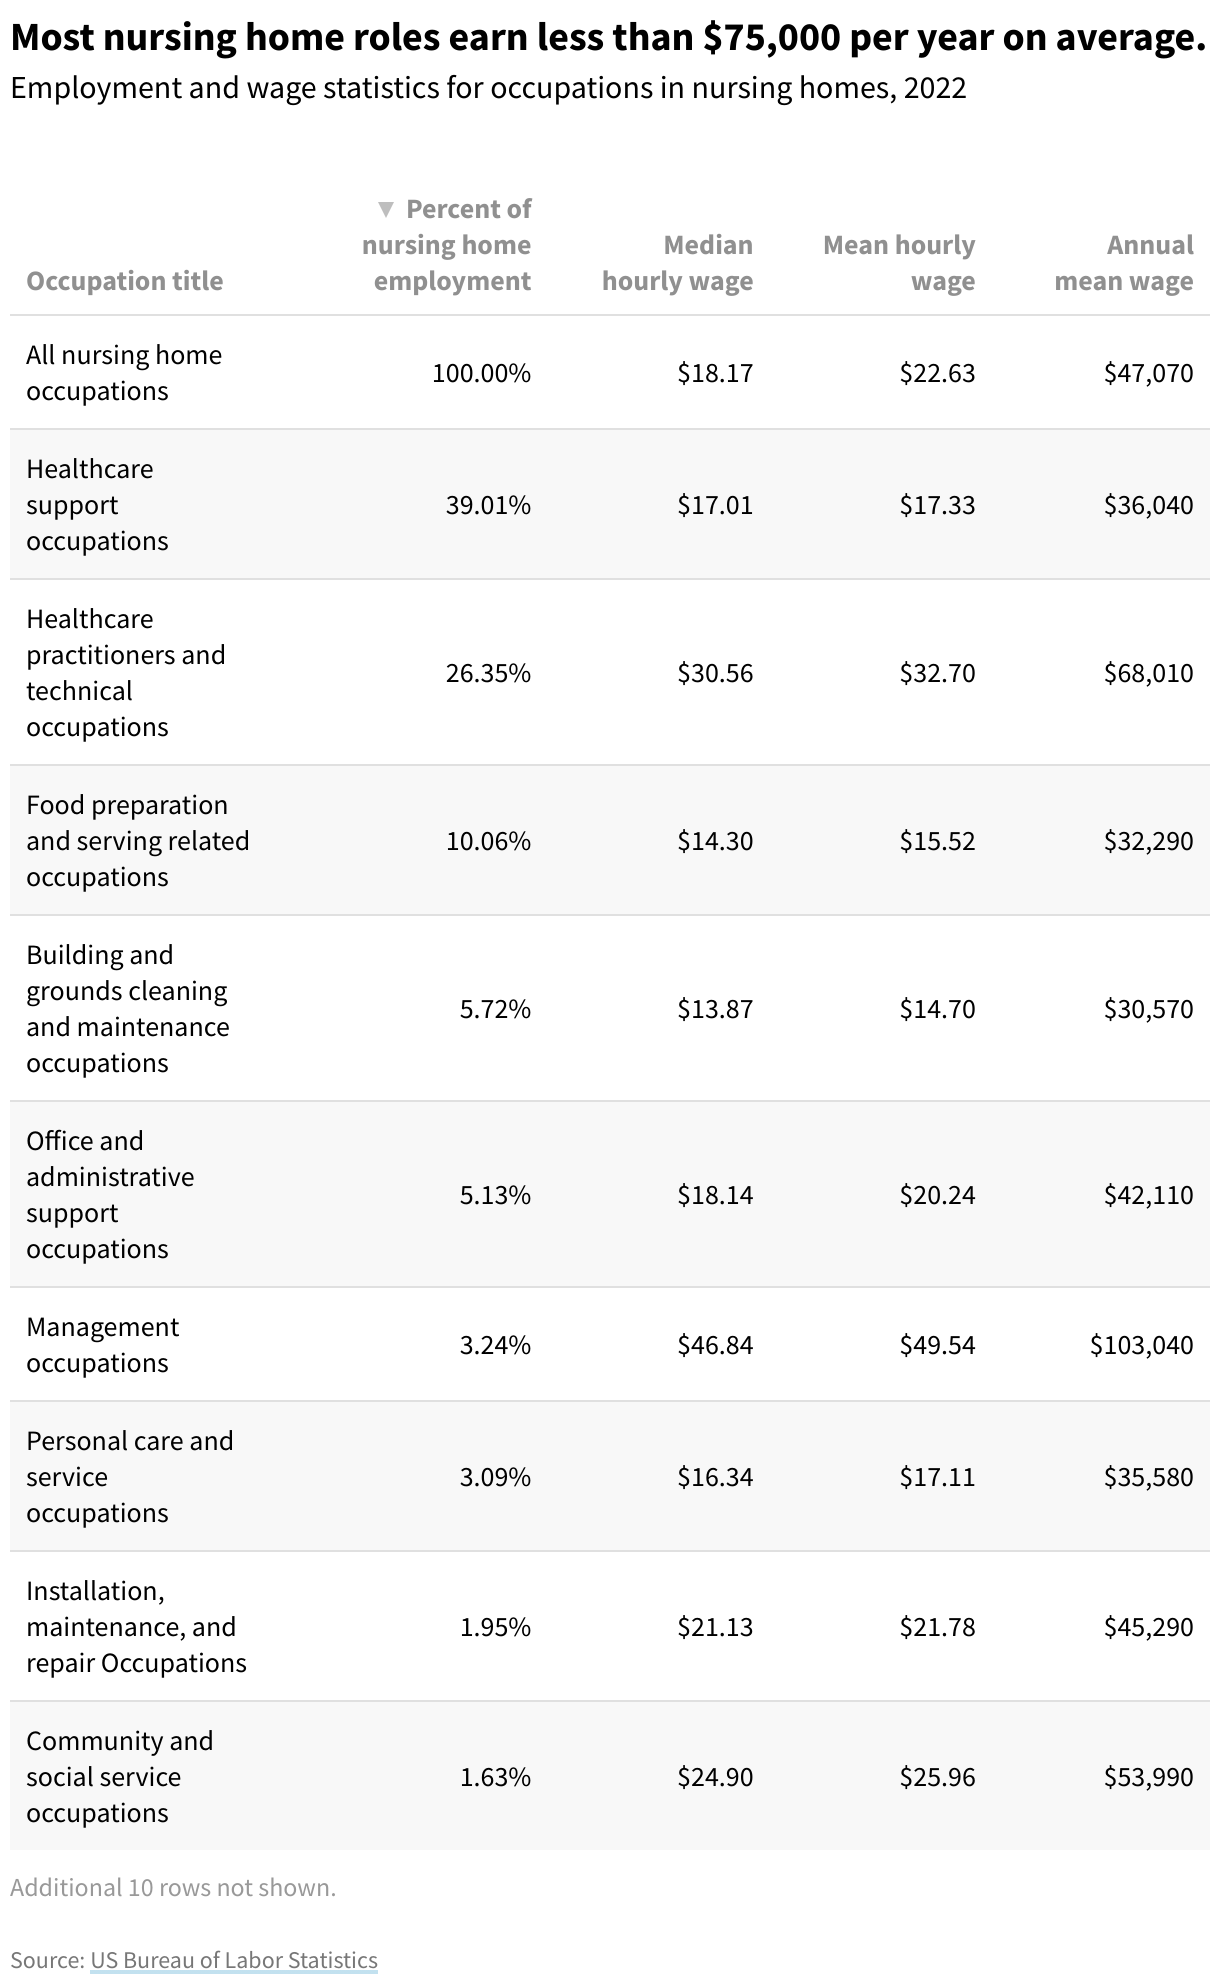 Employment and wage statistics for occupations in nursing homes, 2022. Most nursing home roles earn less than $75,000 per year on average.